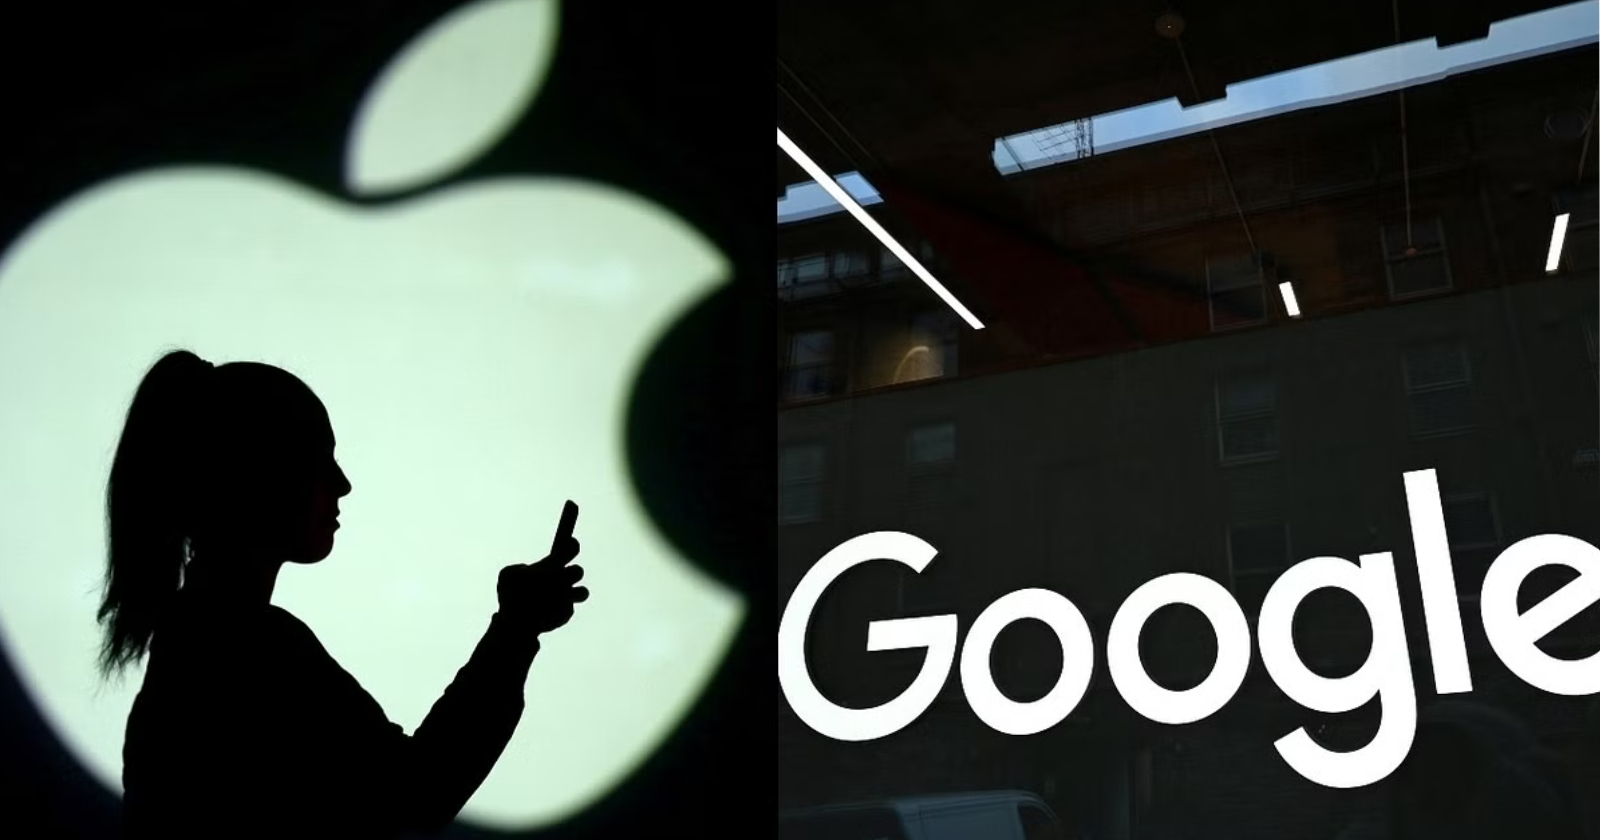 Shocking claim: Google paid billions of dollars to Apple to stay prominent!